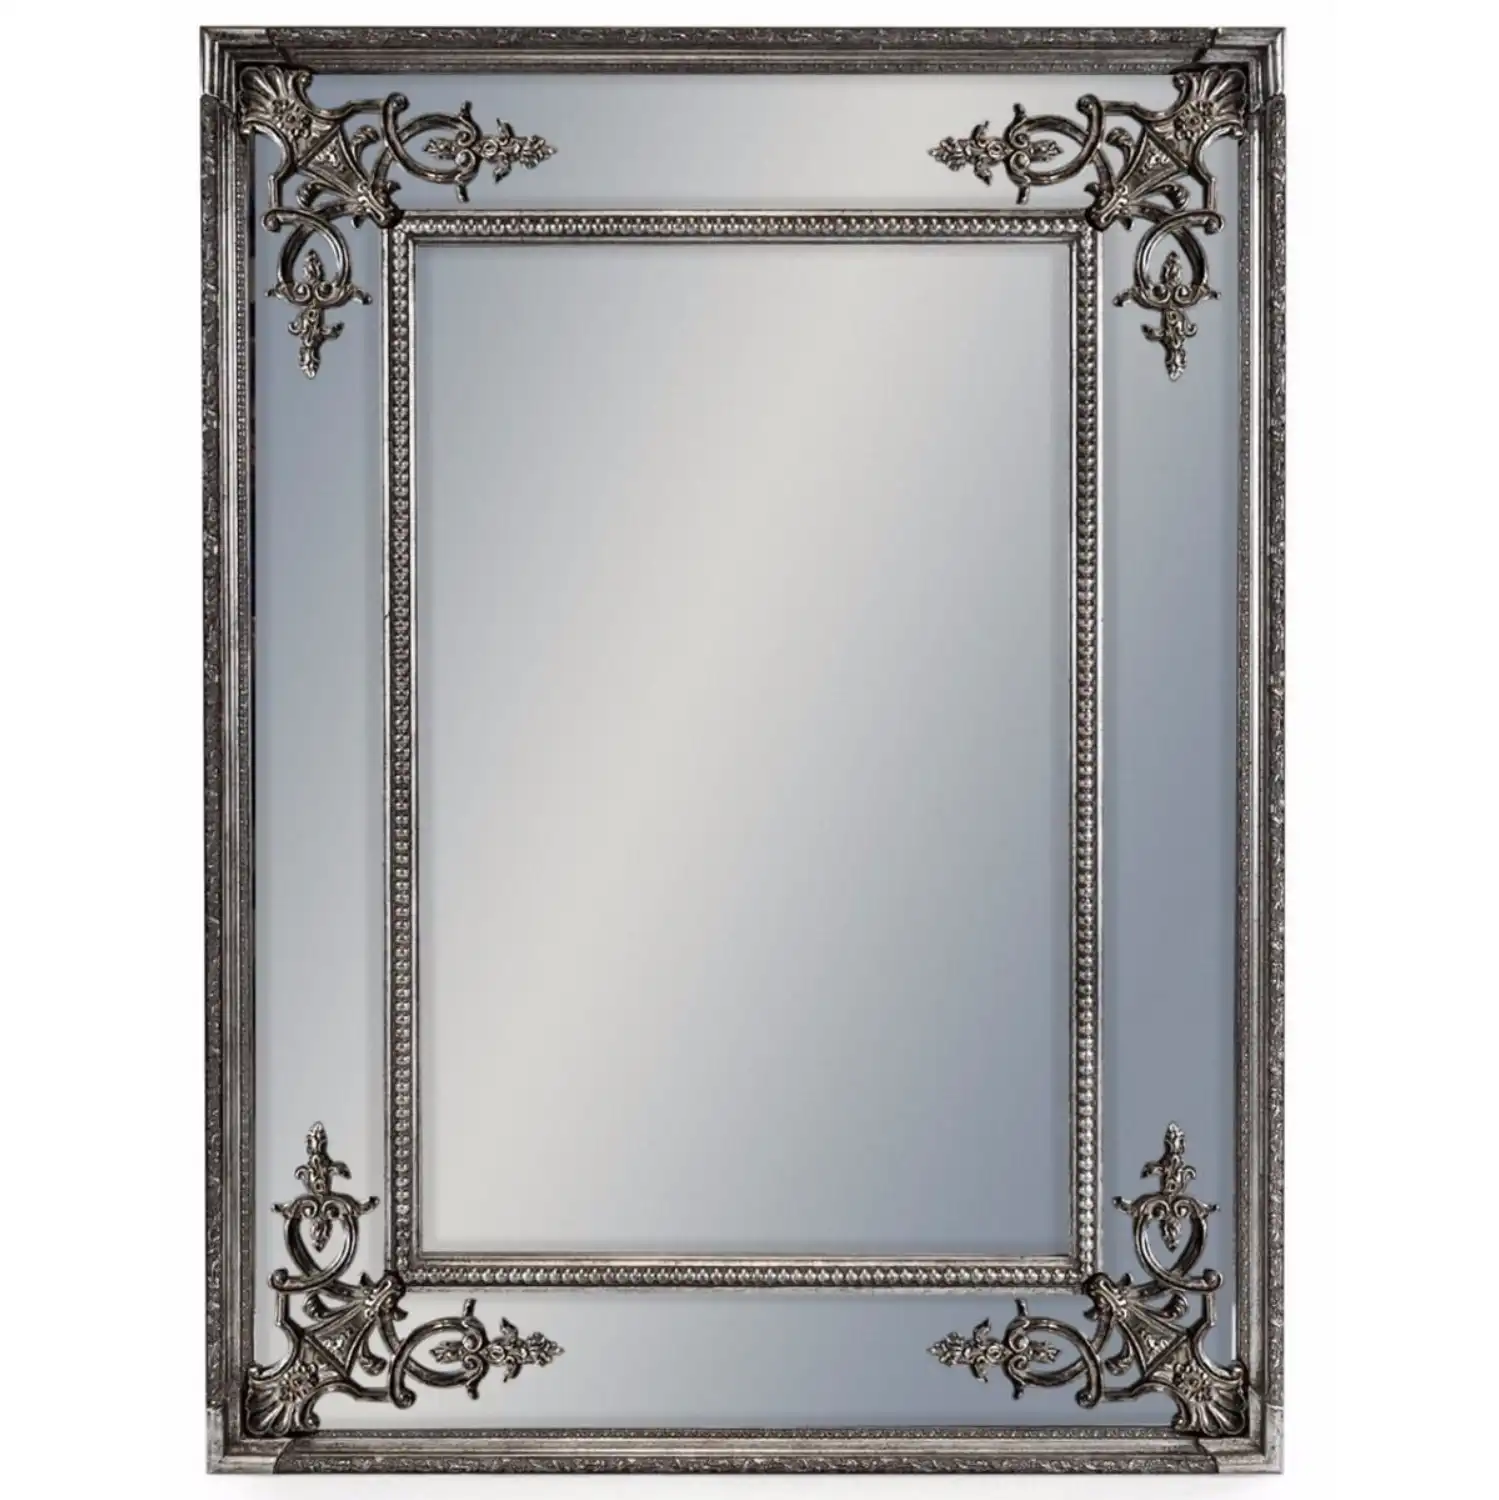 Silver Rectangular Ornate Carved Wall Mirror